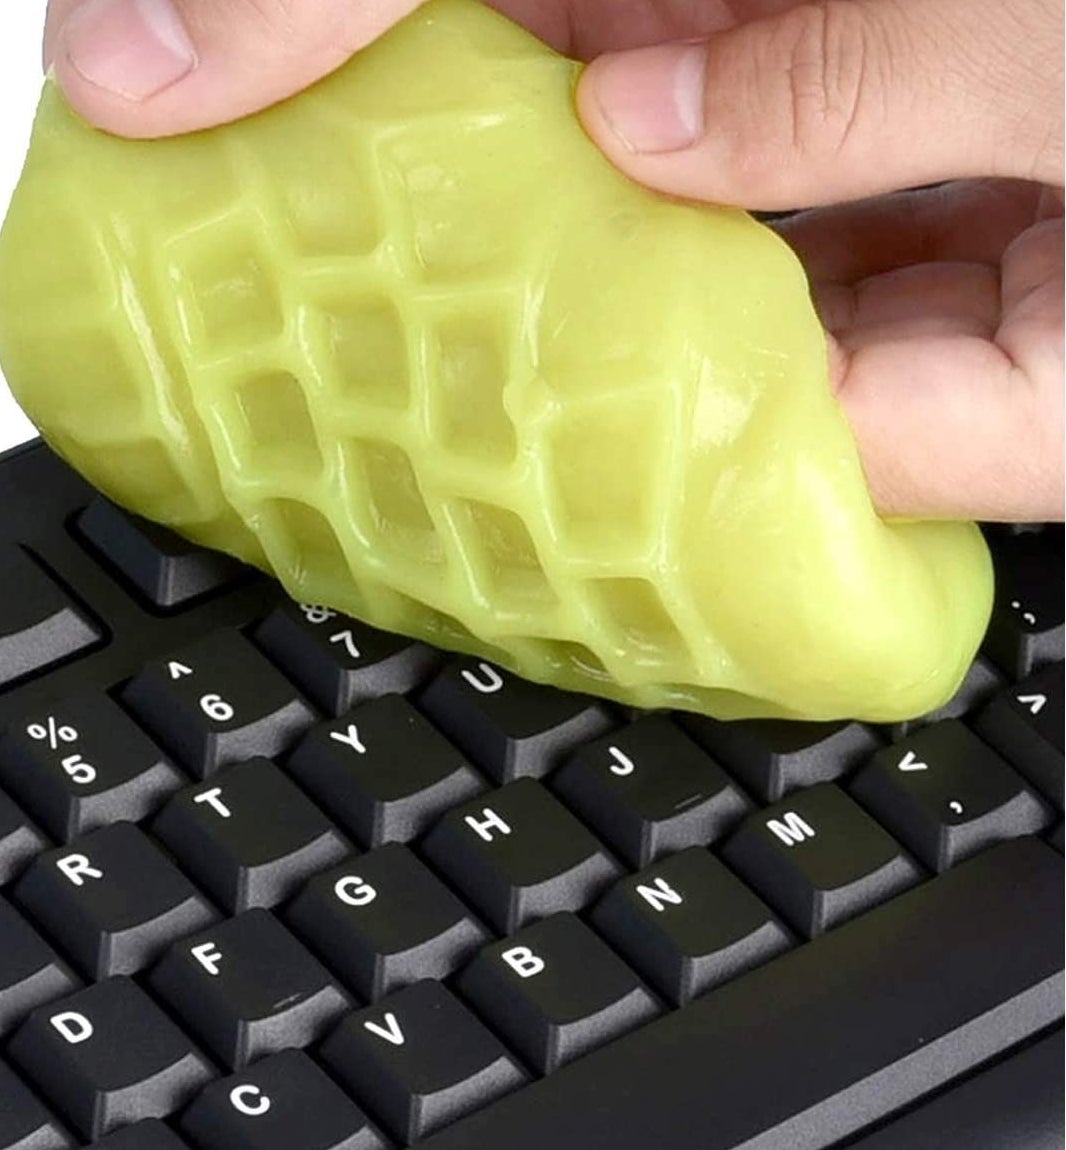 A person cleaning their keyboard with the cleaning putty